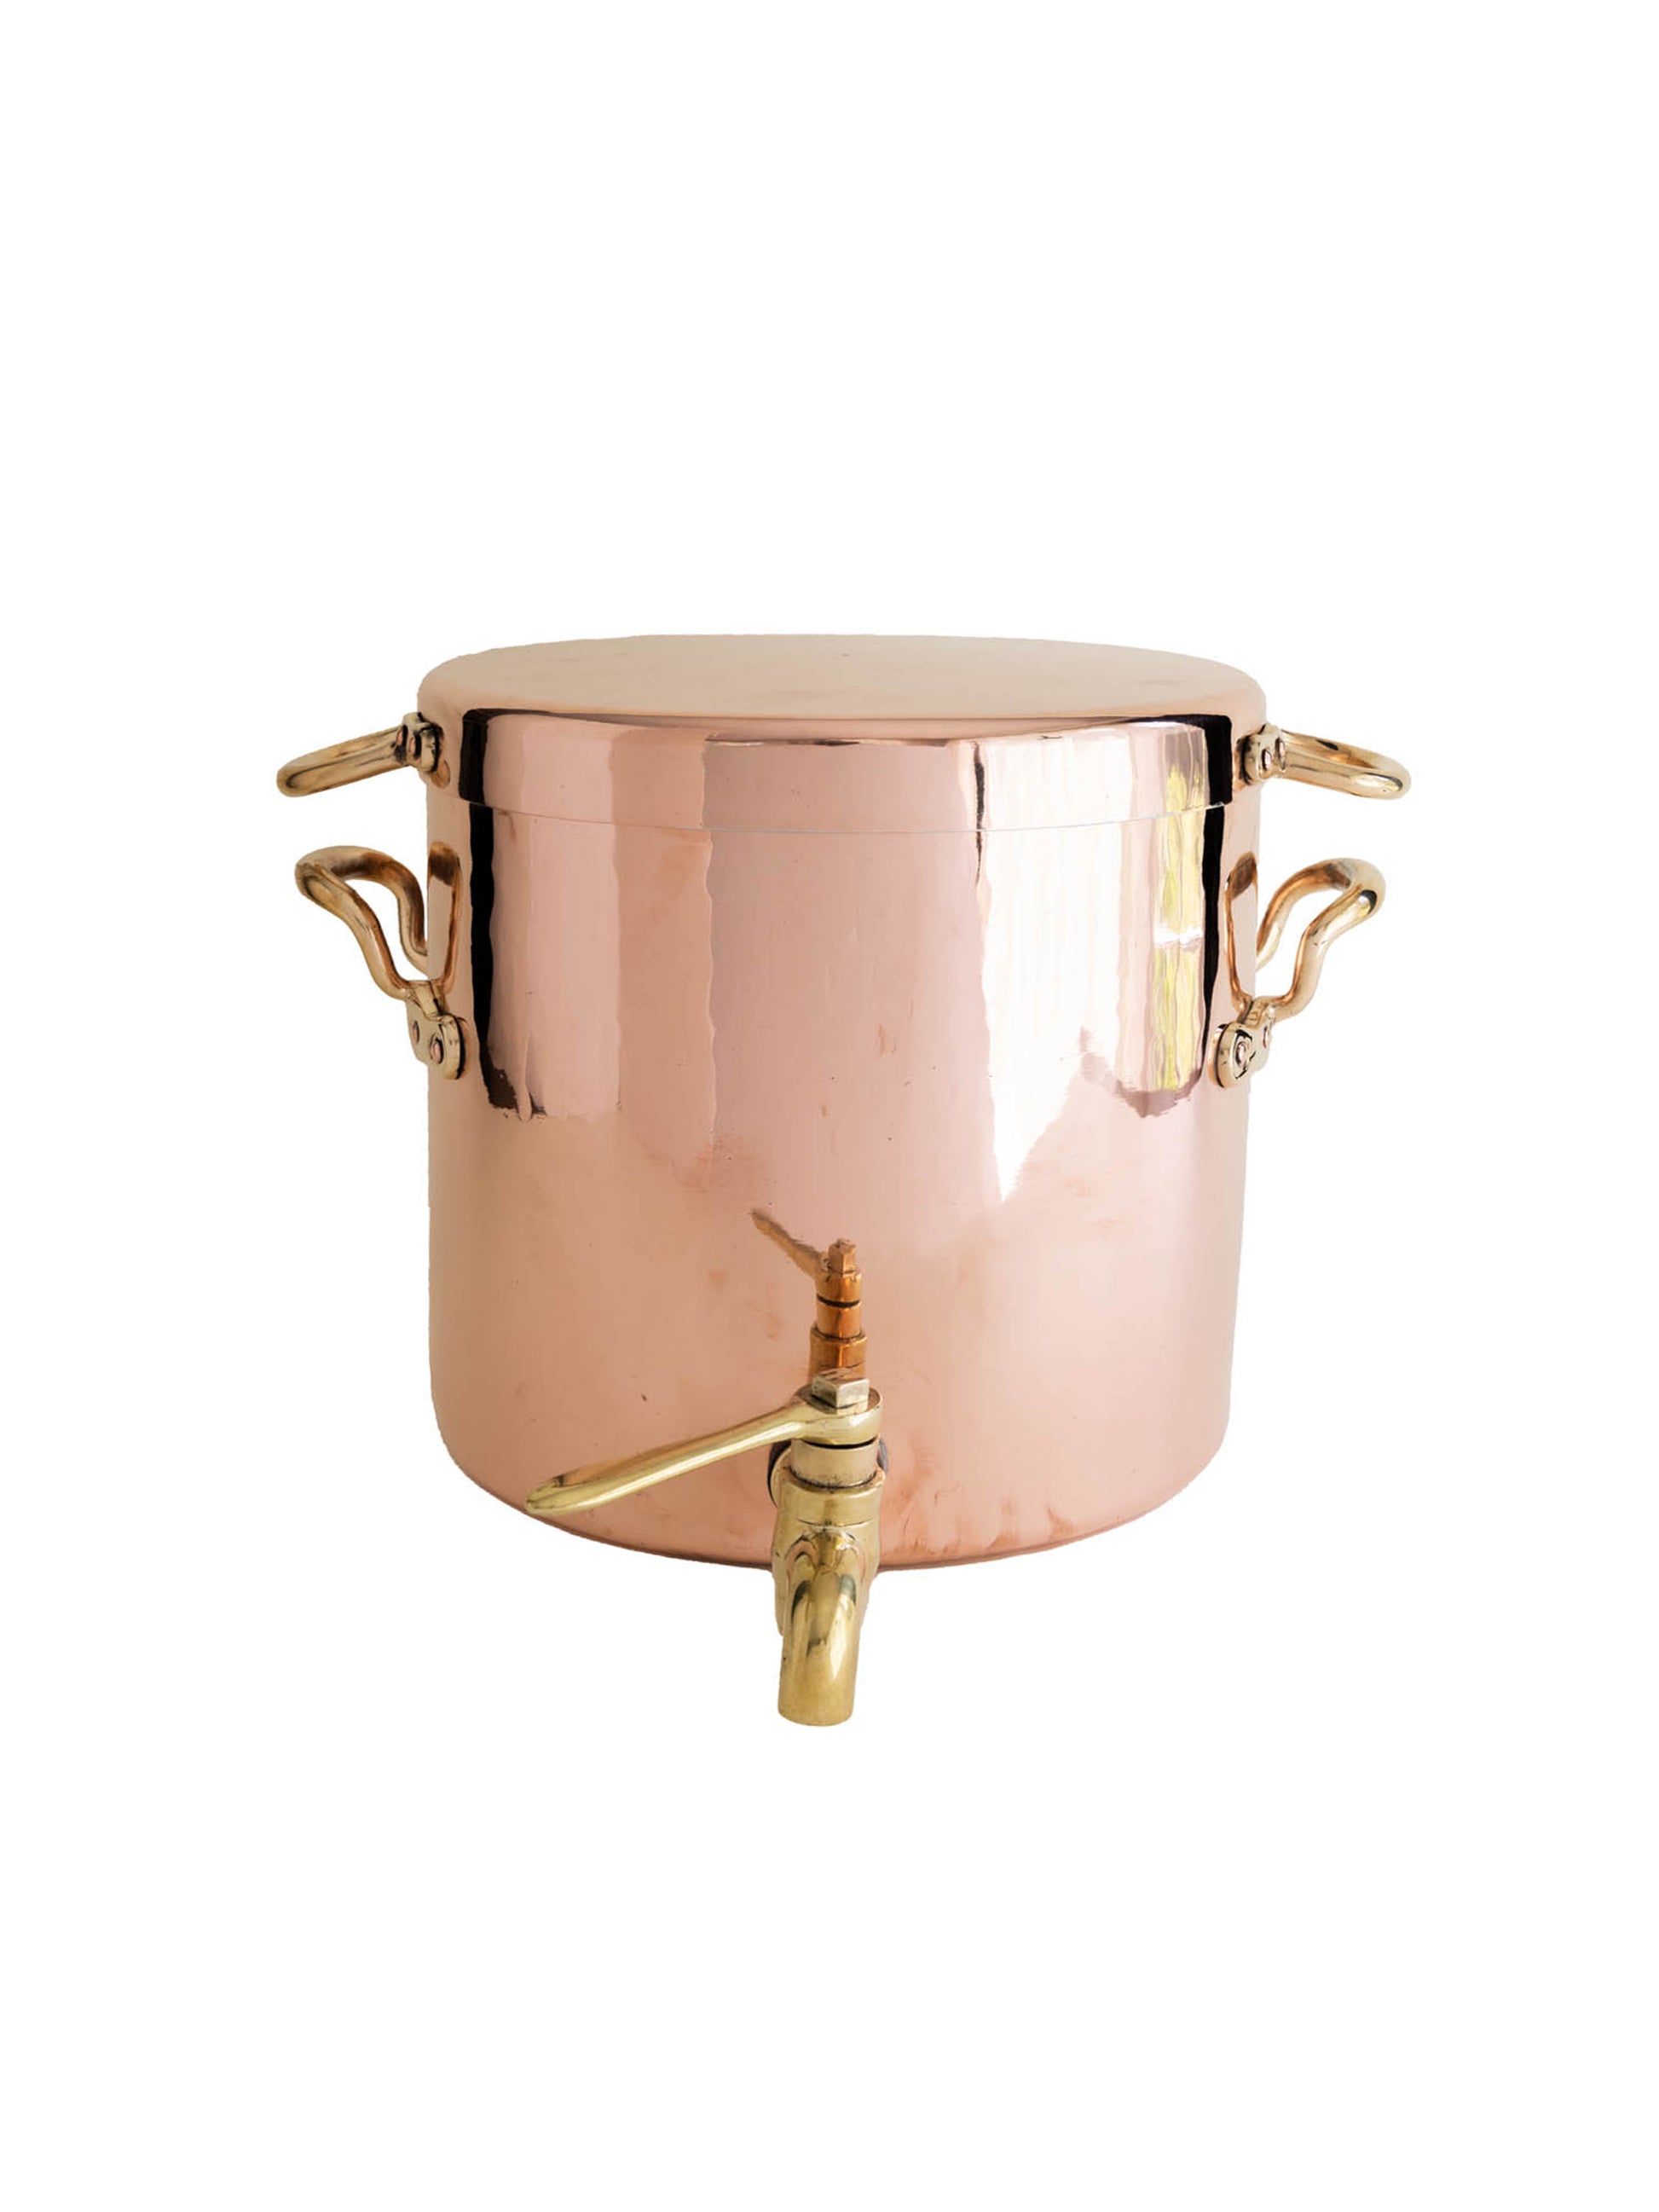 Shop the Vintage 1860s English Copper Stockpot with Spout and Saute Pan Lid  at Weston Table